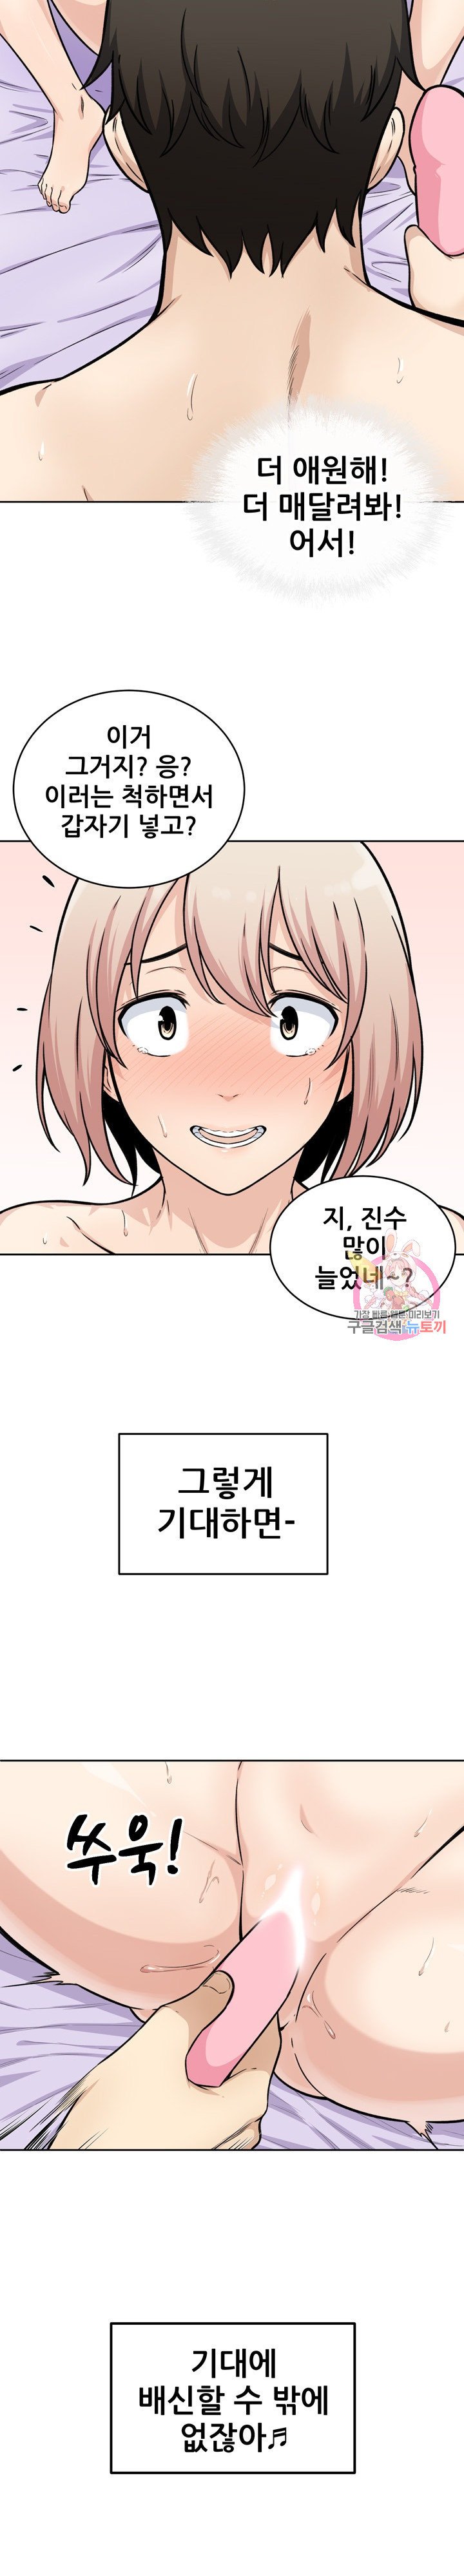 the-ark-is-me-raw-chap-34-19